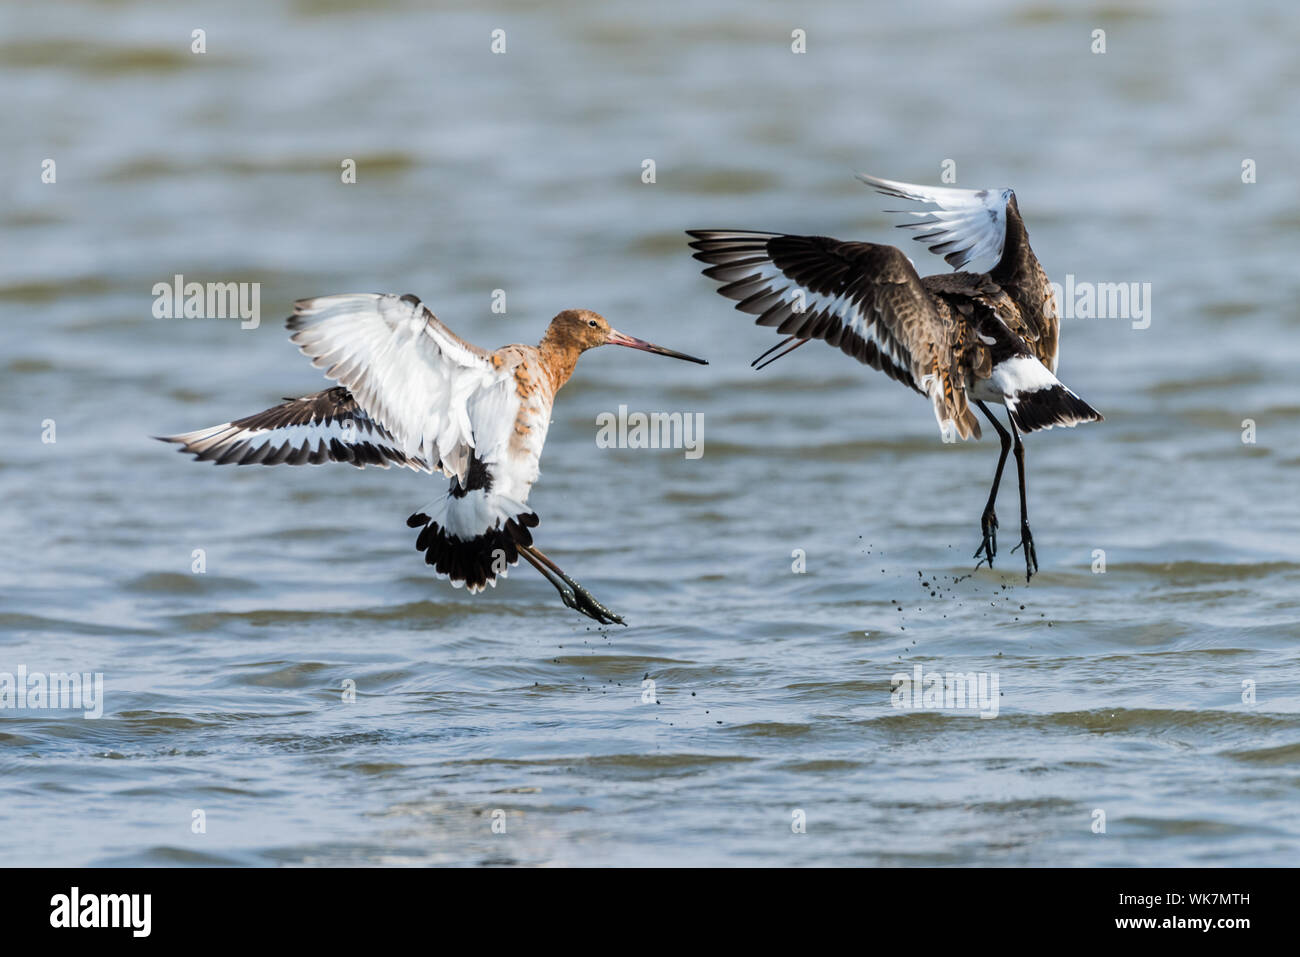 Nero tailed godwits sparring a metà in aria. Foto Stock